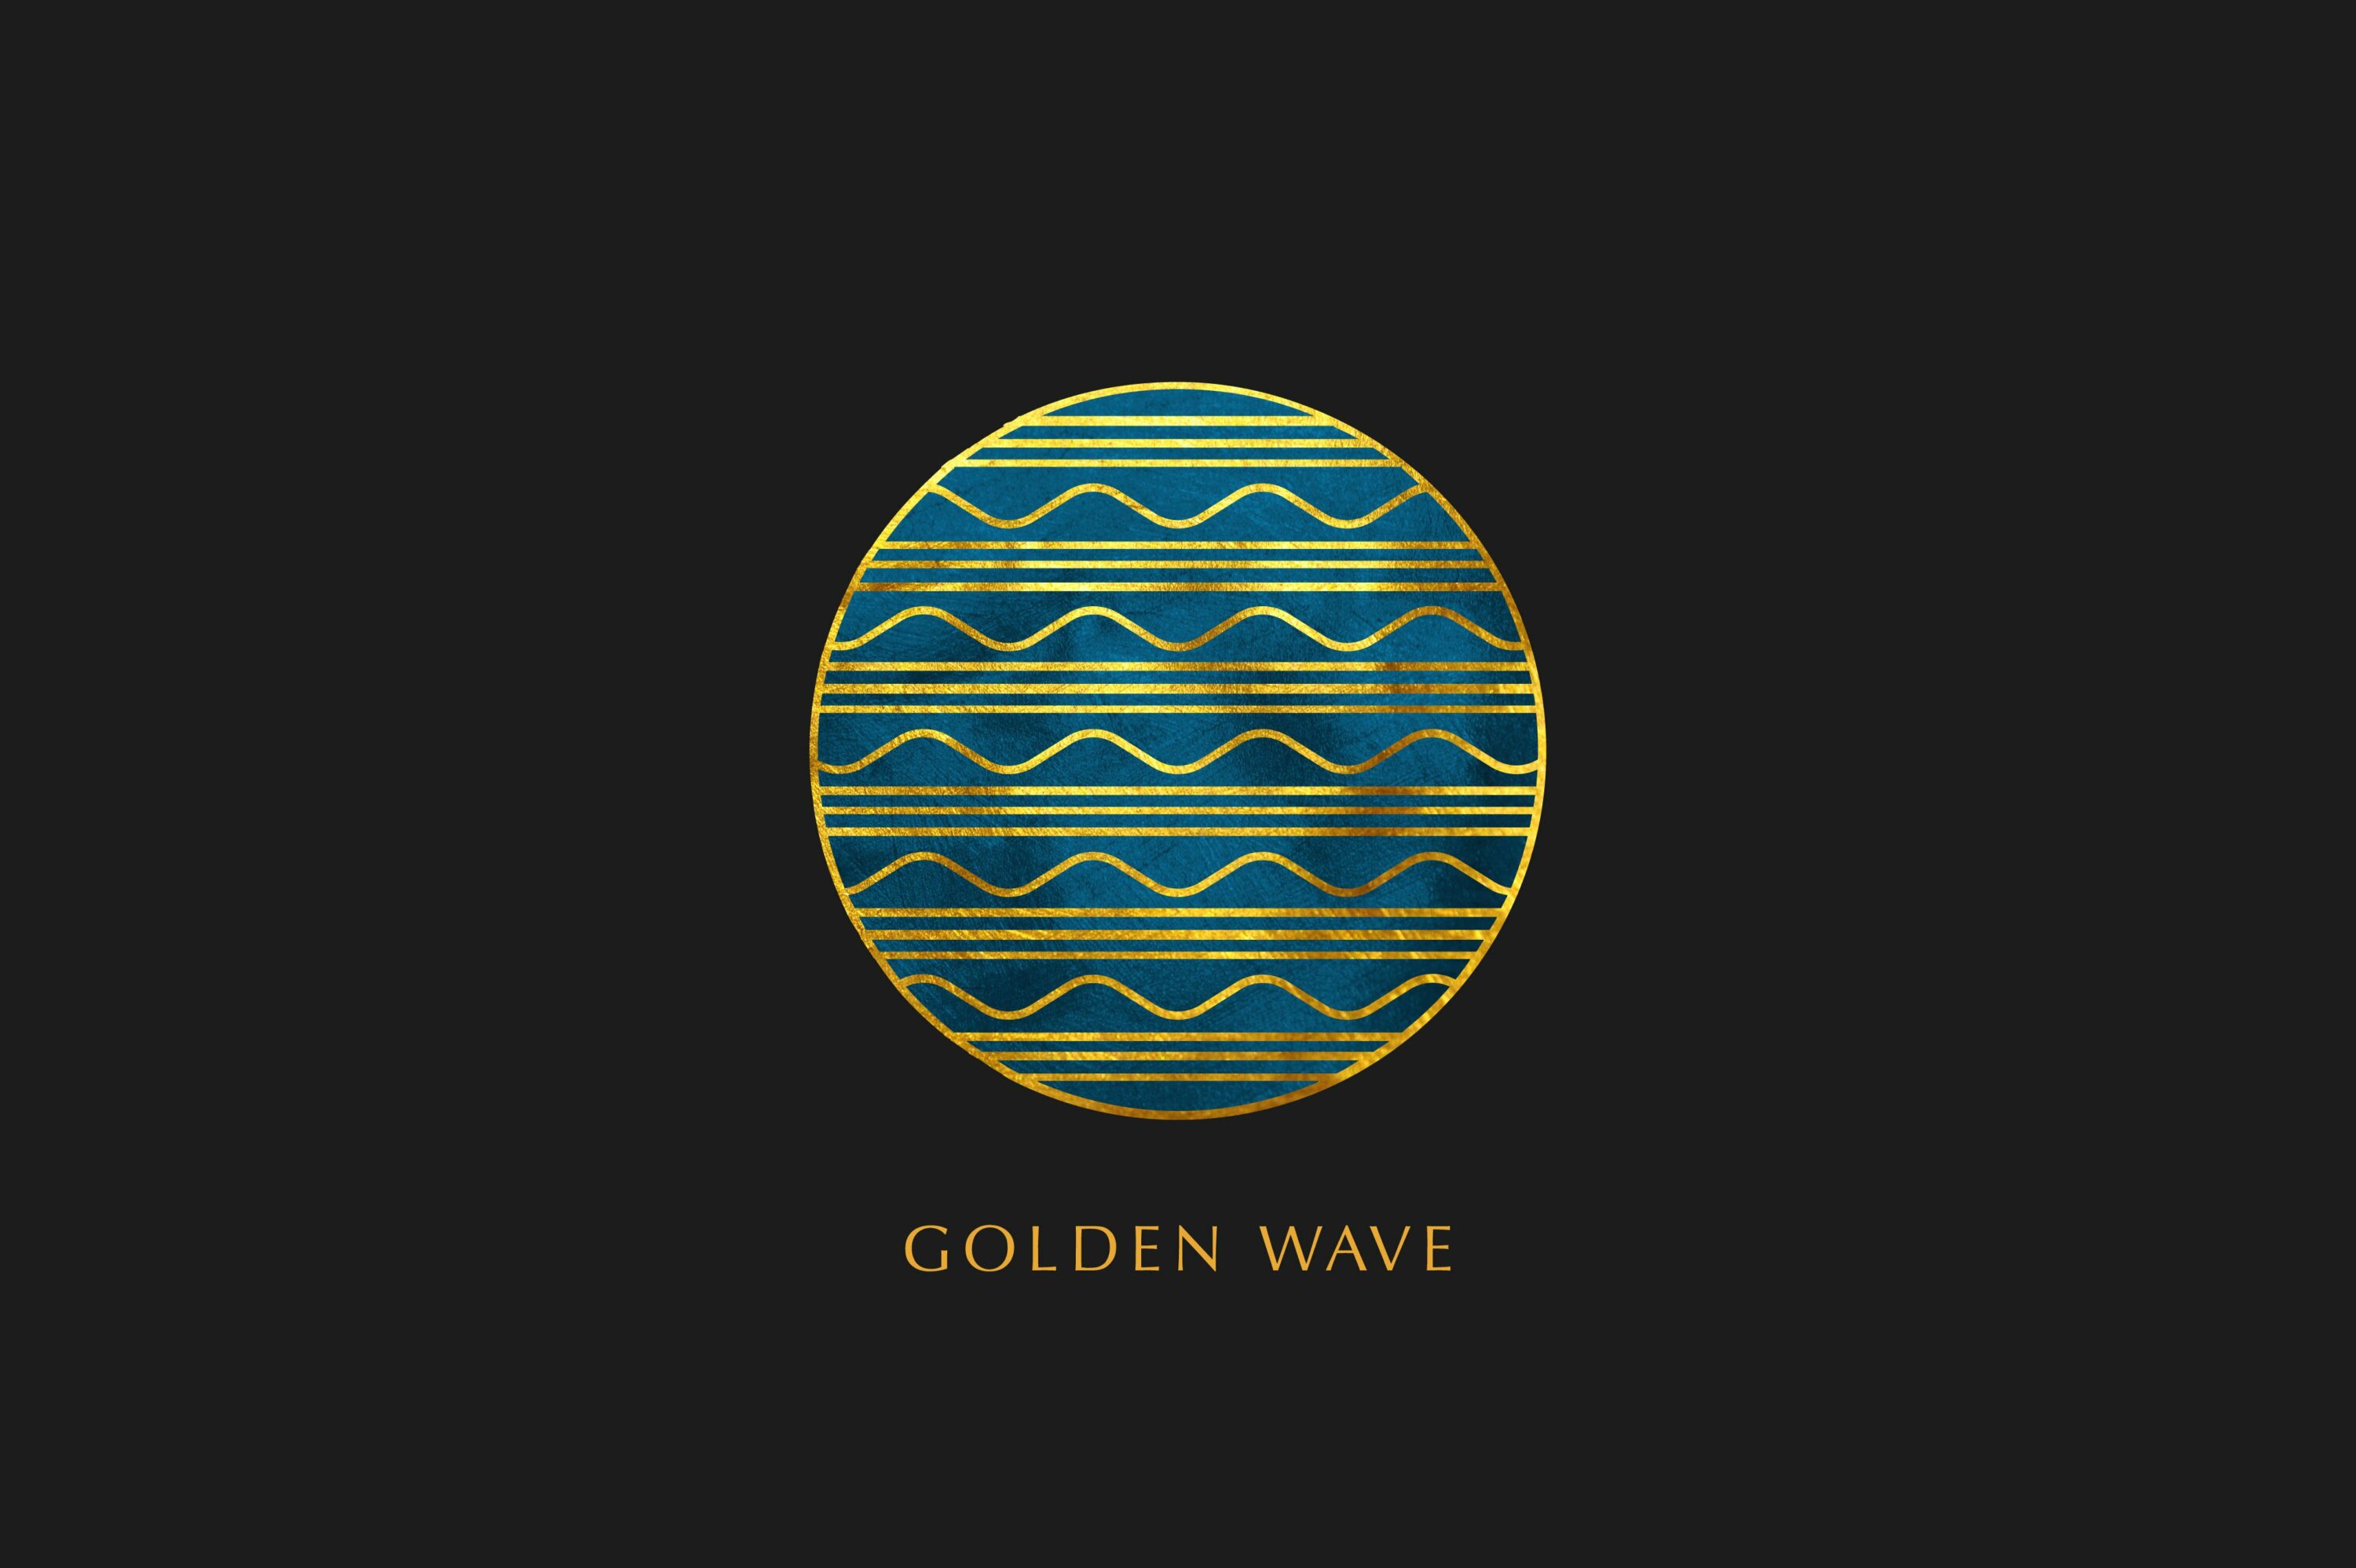 Green wave logo in a round shape with gold border.